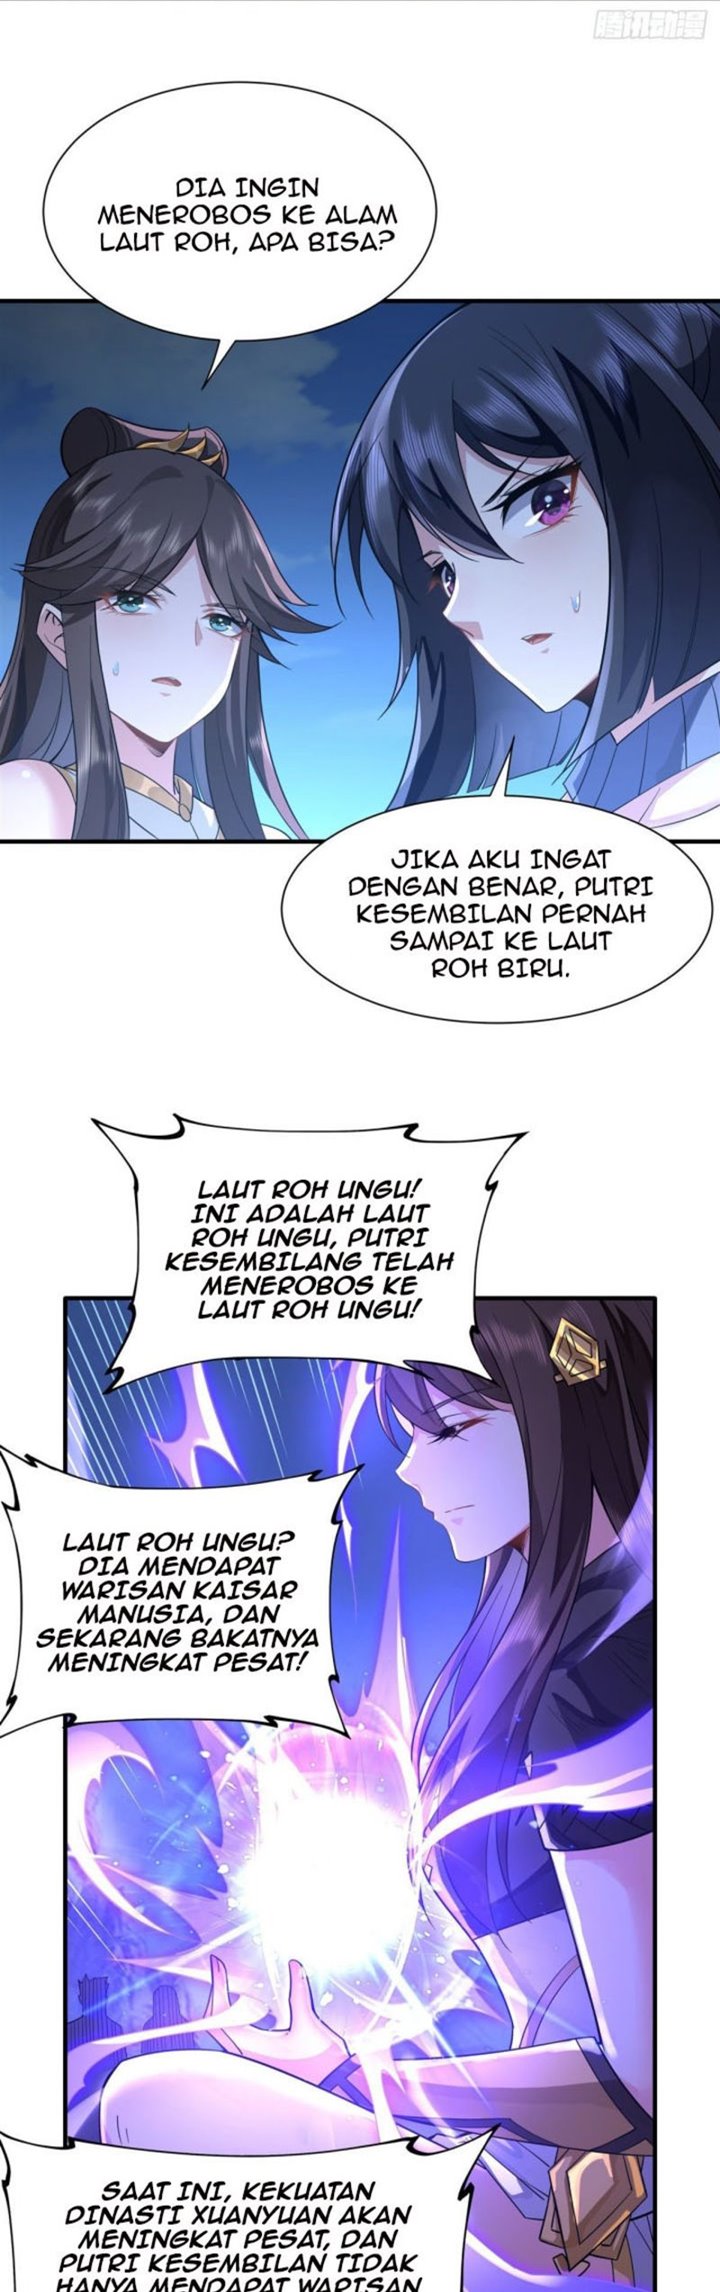 Dilarang COPAS - situs resmi www.mangacanblog.com - Komik my female apprentices are all big shots from the future 015 - chapter 15 16 Indonesia my female apprentices are all big shots from the future 015 - chapter 15 Terbaru 14|Baca Manga Komik Indonesia|Mangacan